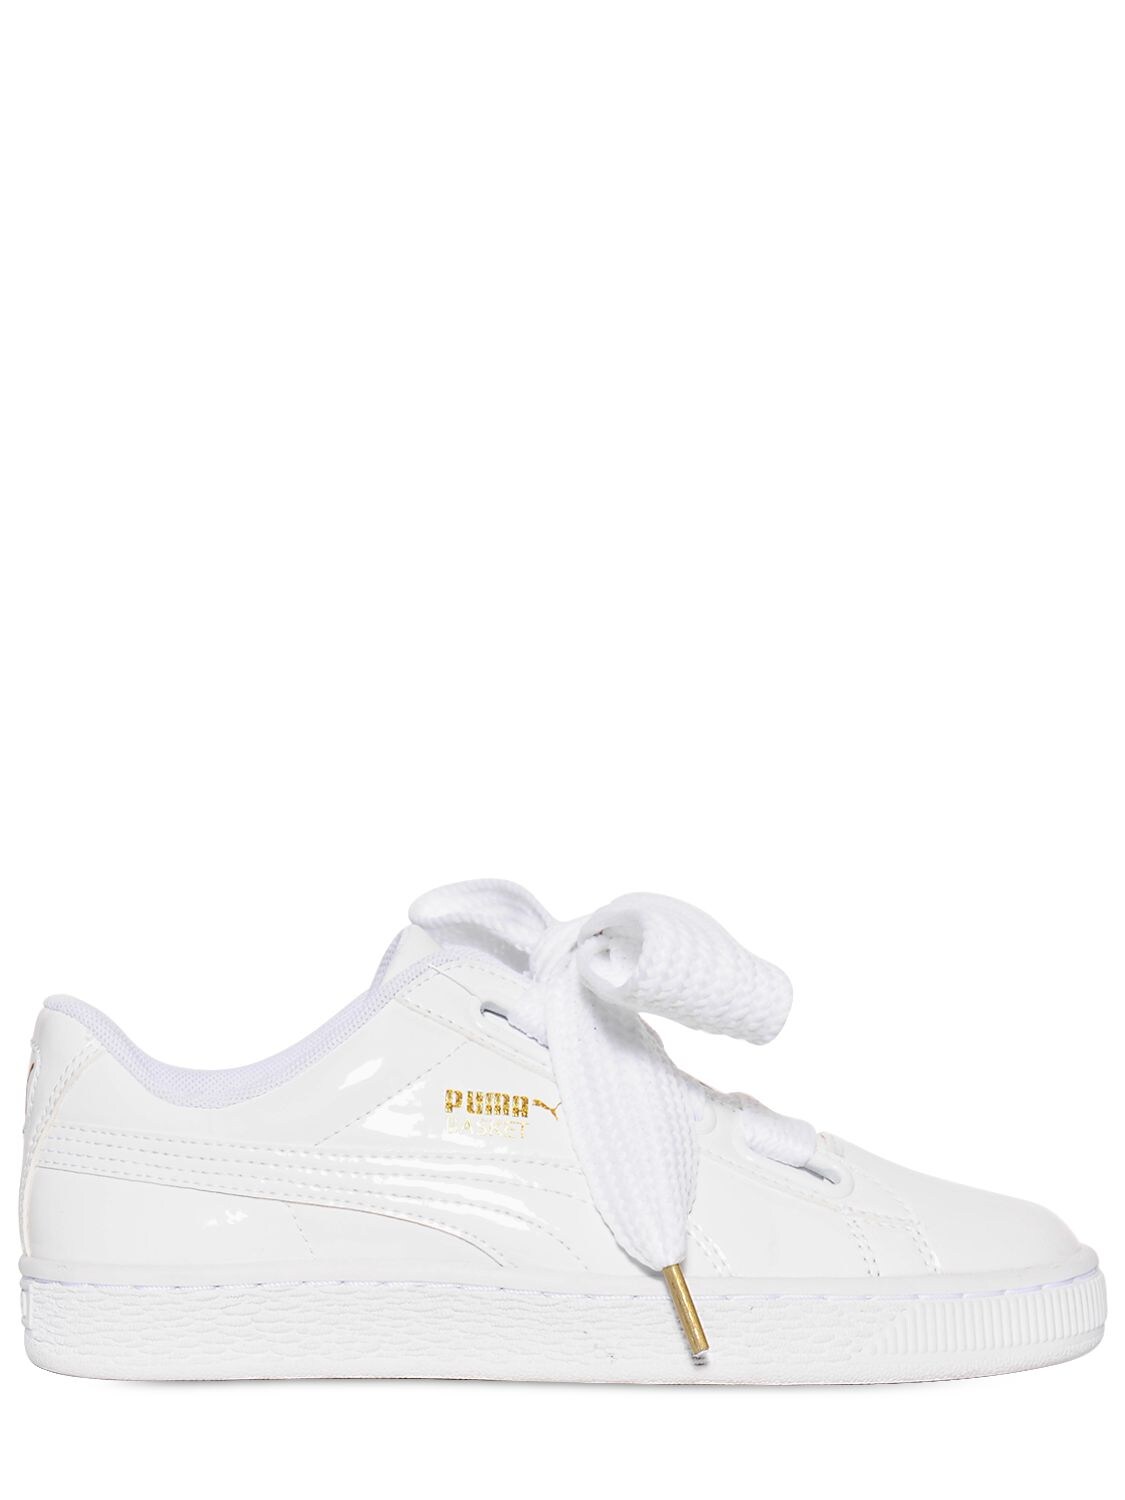 Puma Basket Heart Patent Leather Trainers In White